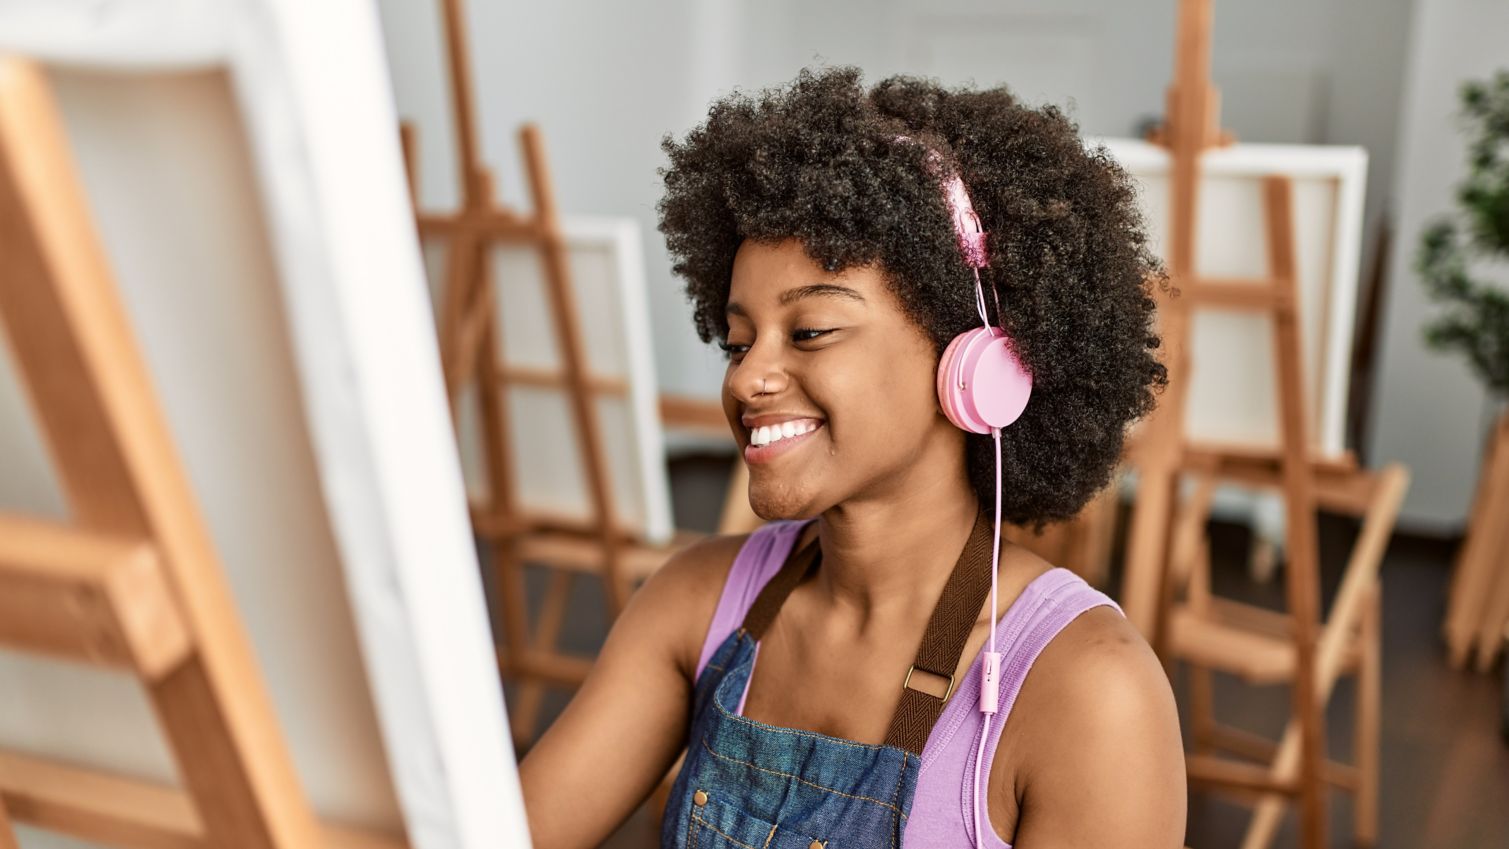 A woman paints while listening to music with headphones.